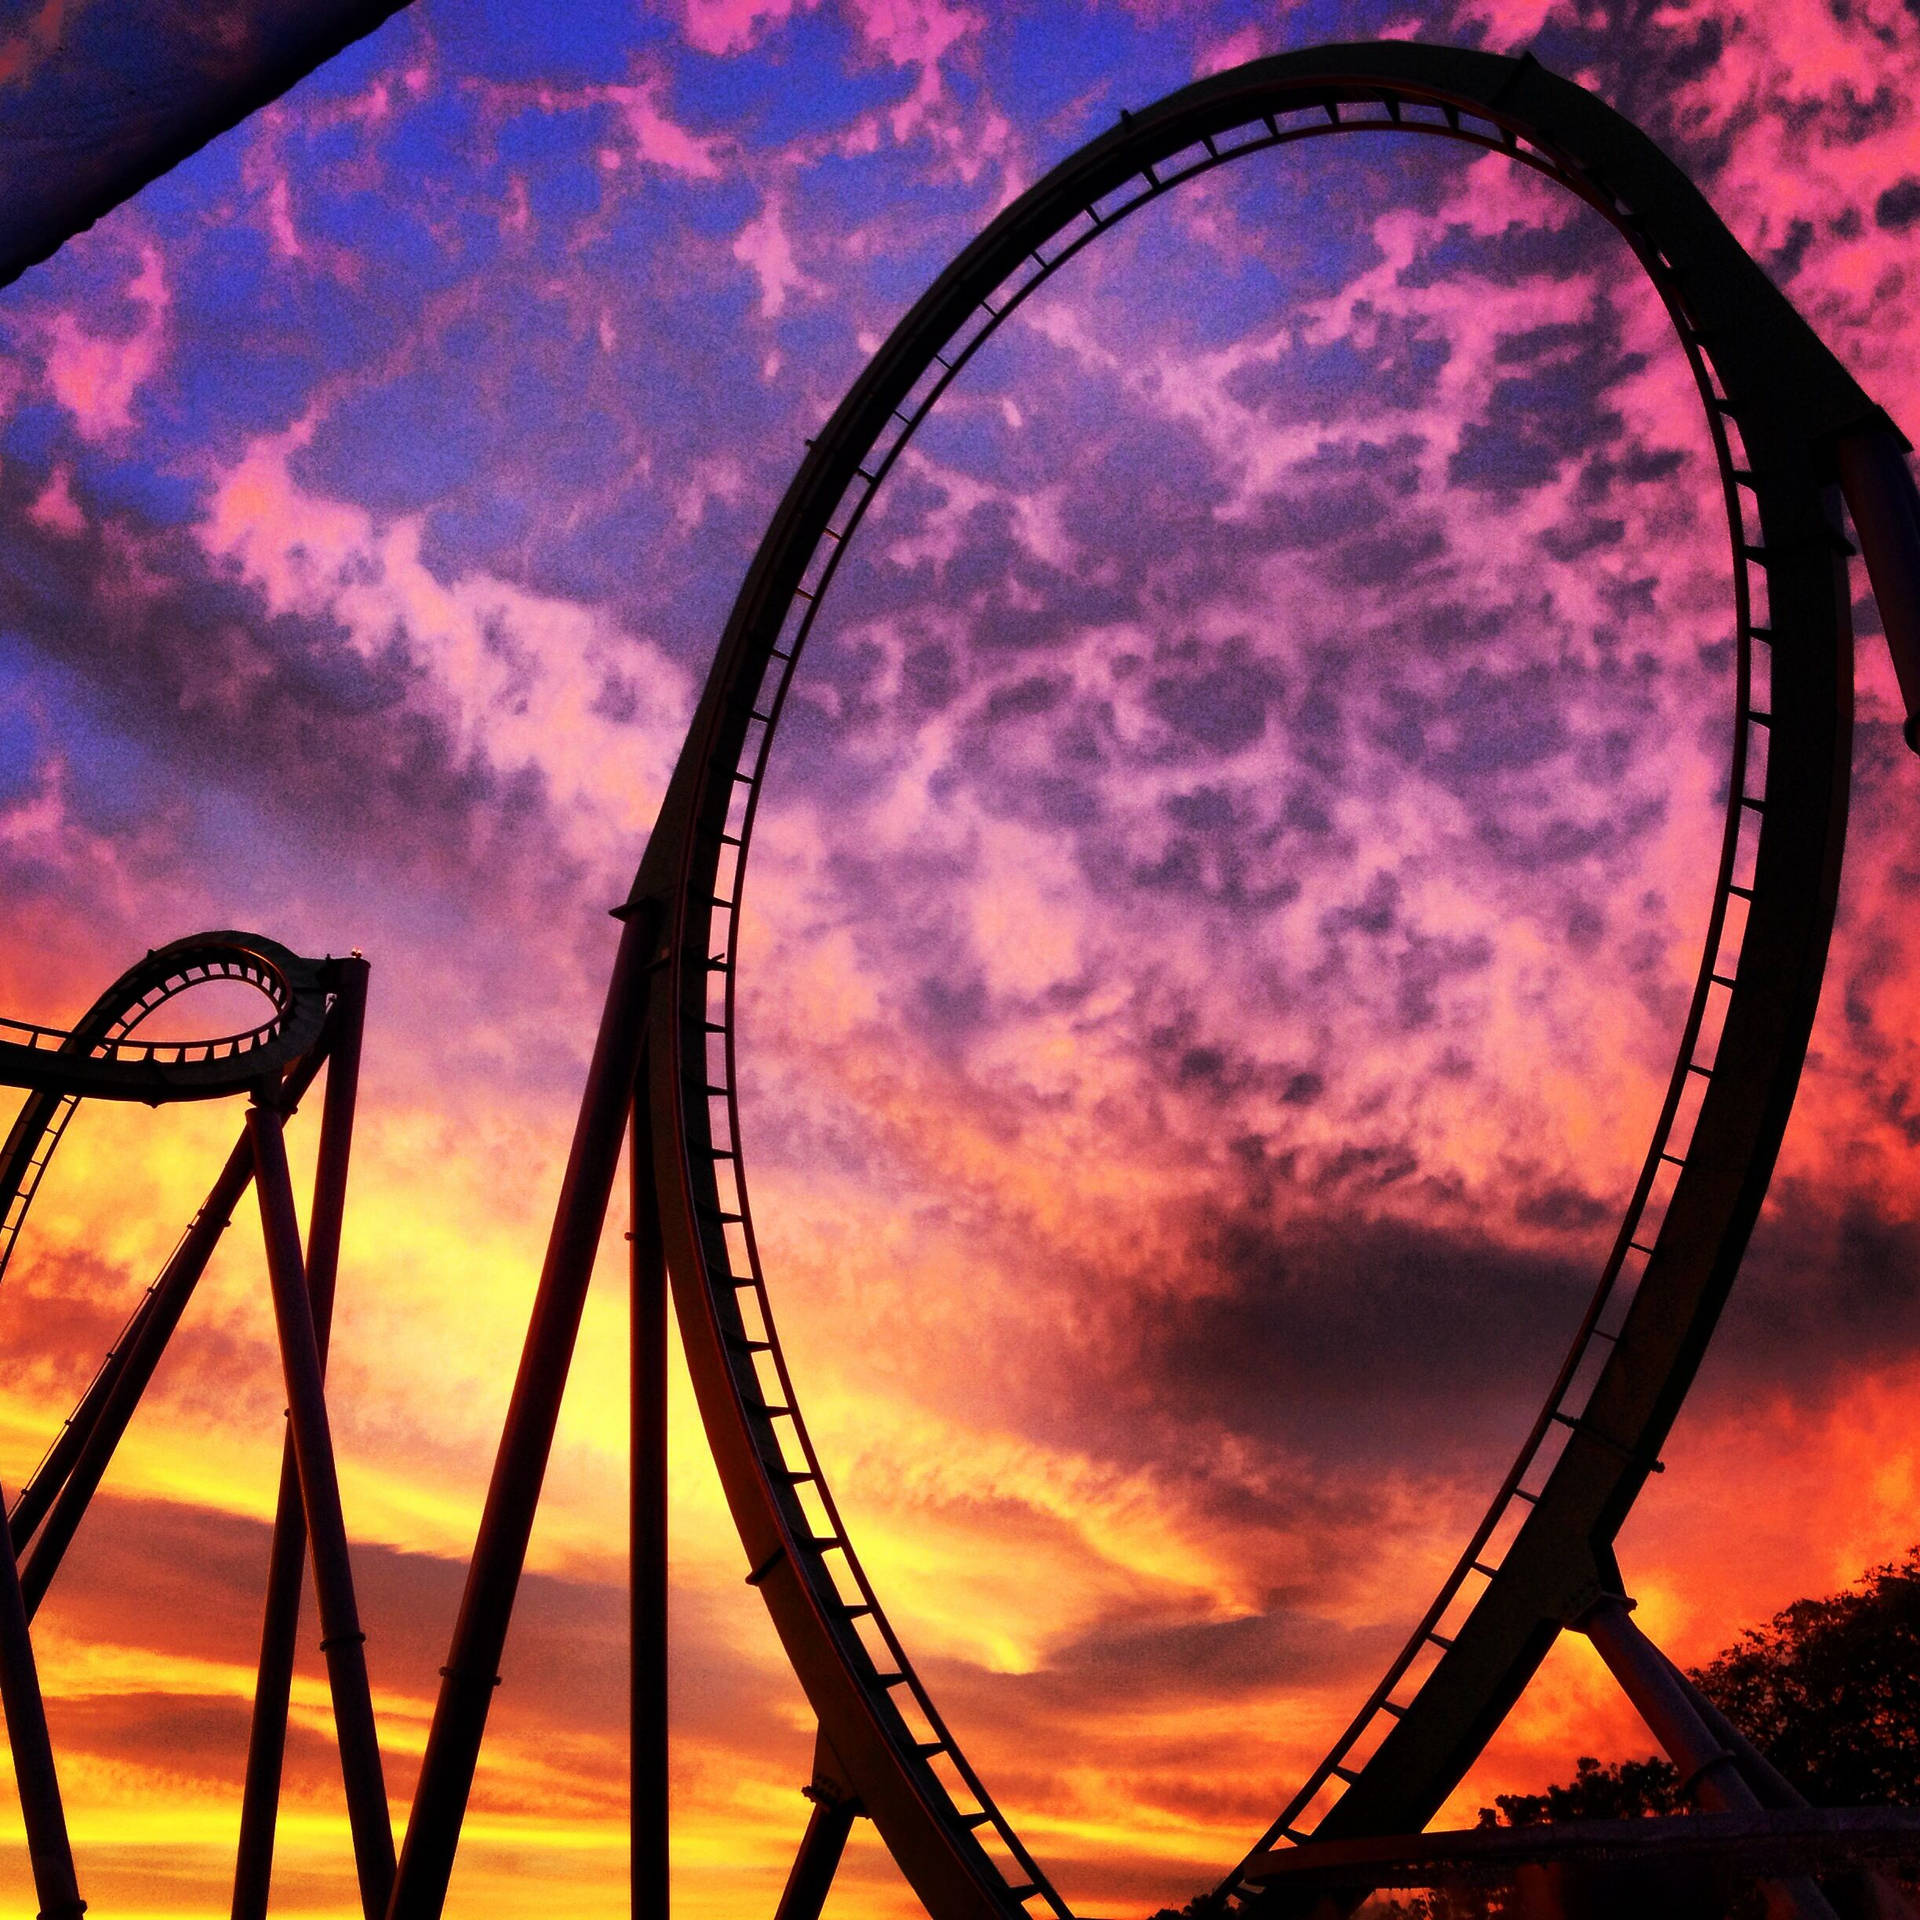 High-flying Thrill On A Roller Coaster Amidst Vibrant Sunset